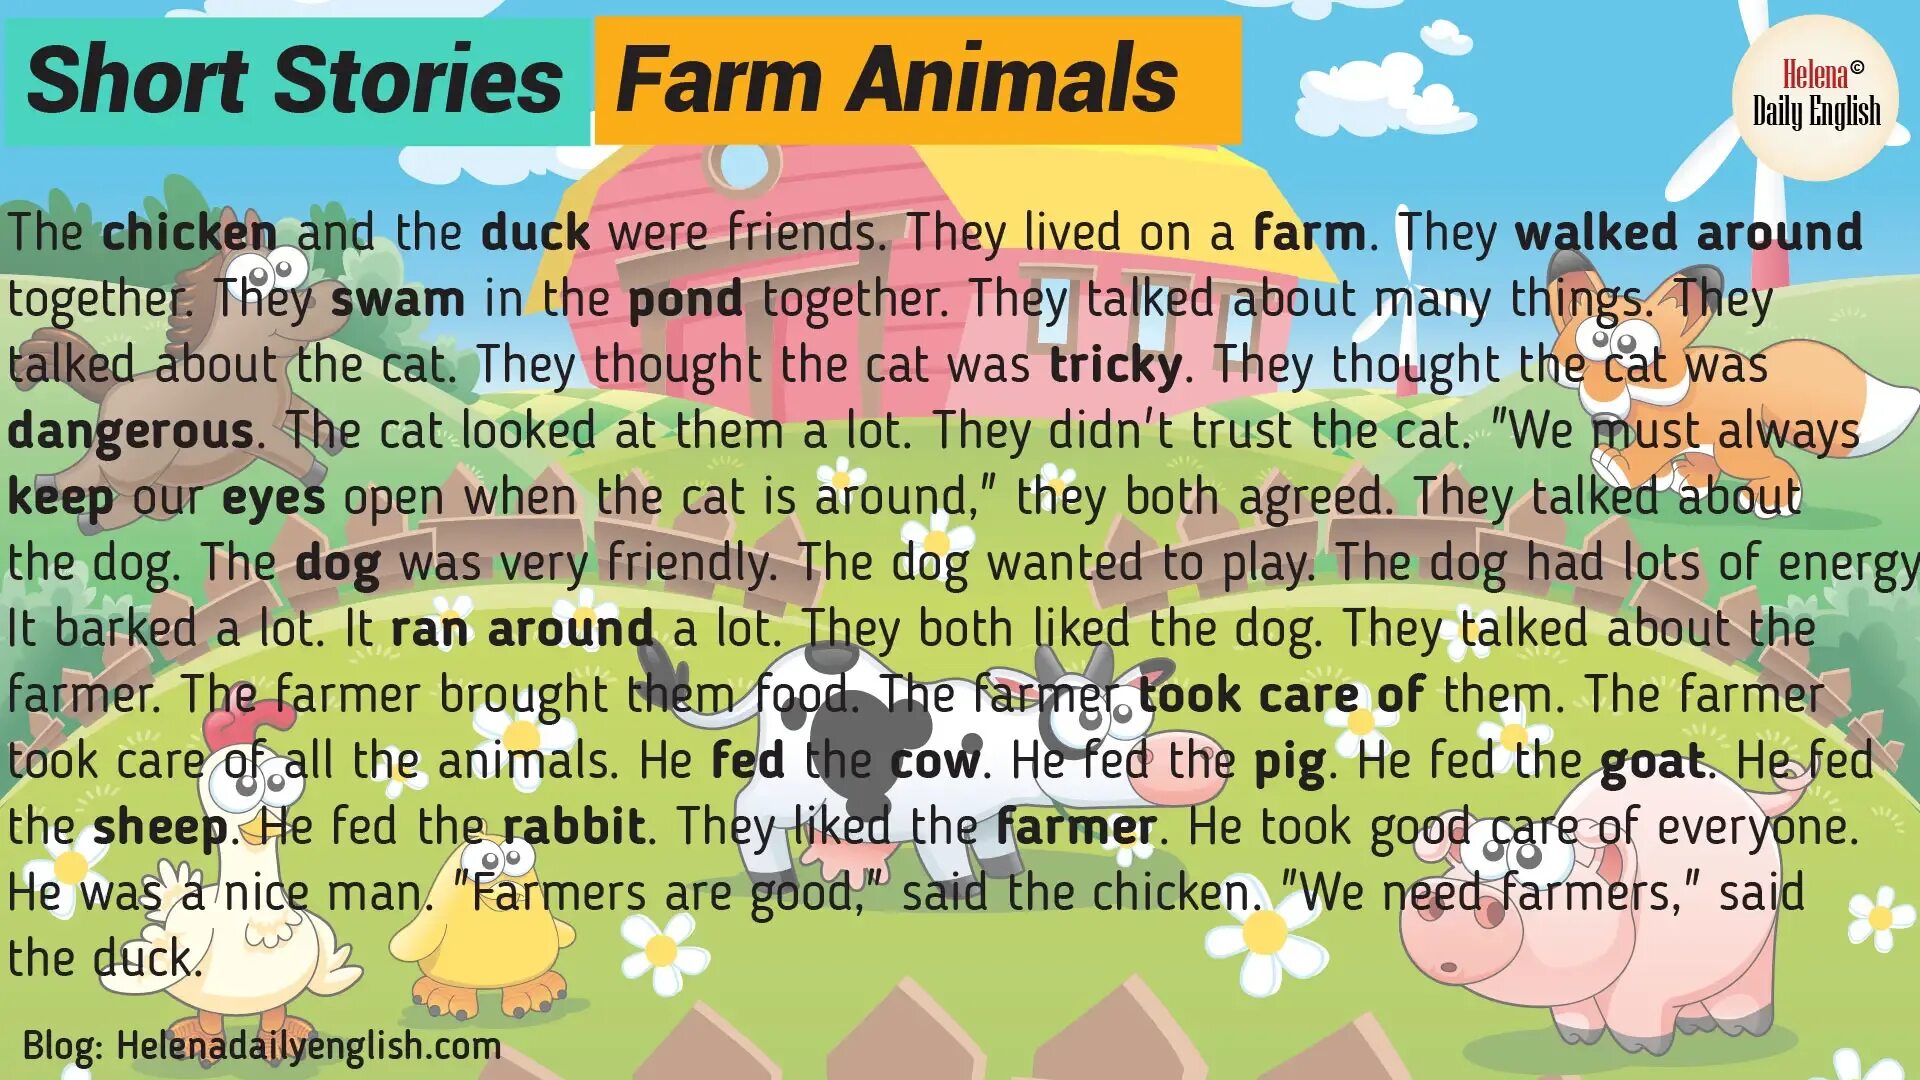 Talk about your favorite. Stories in English. Английский тема on the Farm. Short stories. Рассказ на английском.